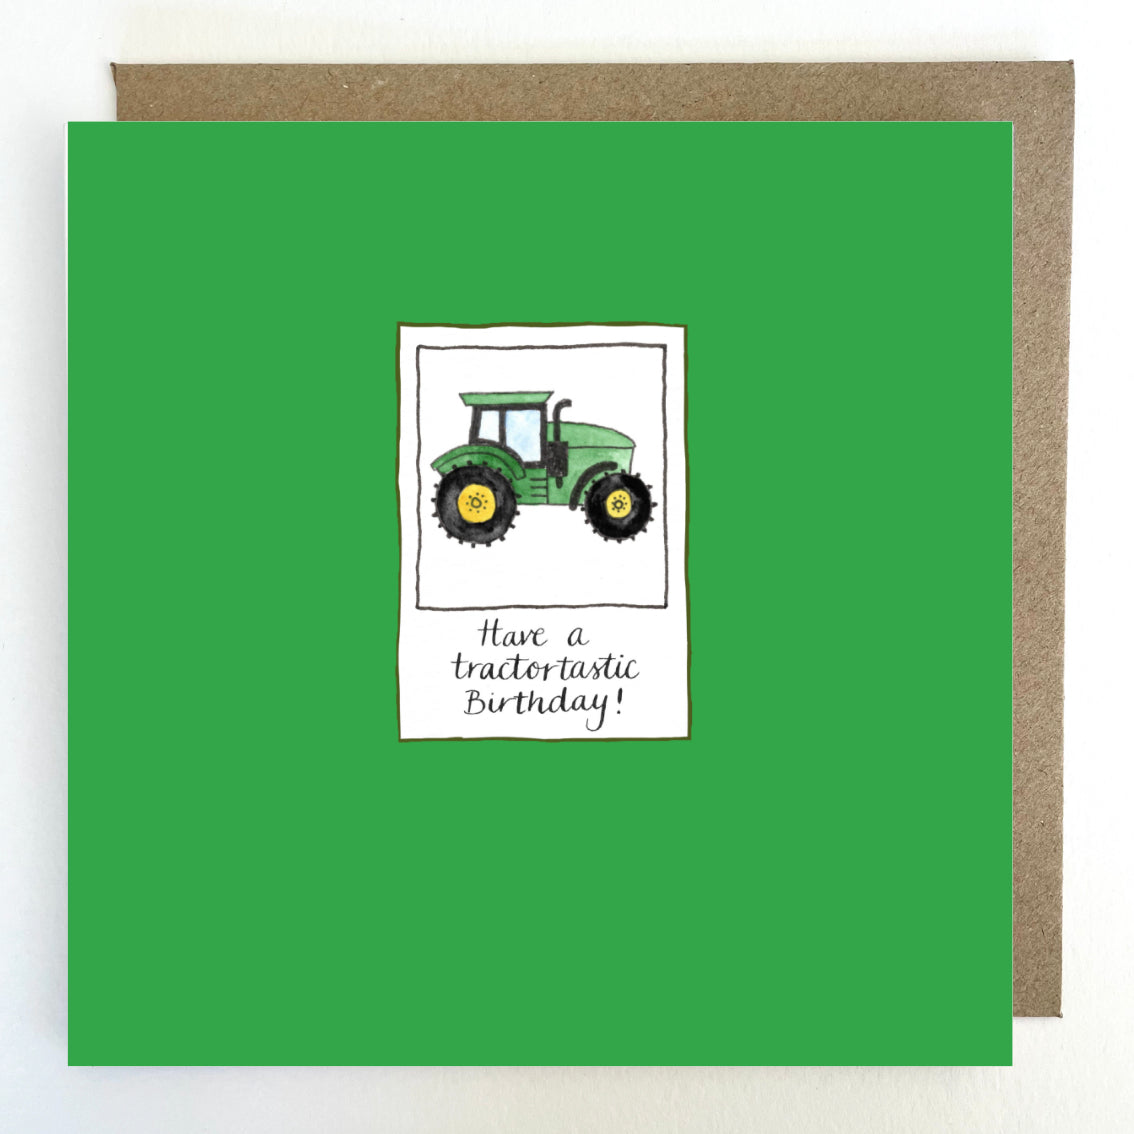 K279. Have a Tractortastic Birthday Greetings Card